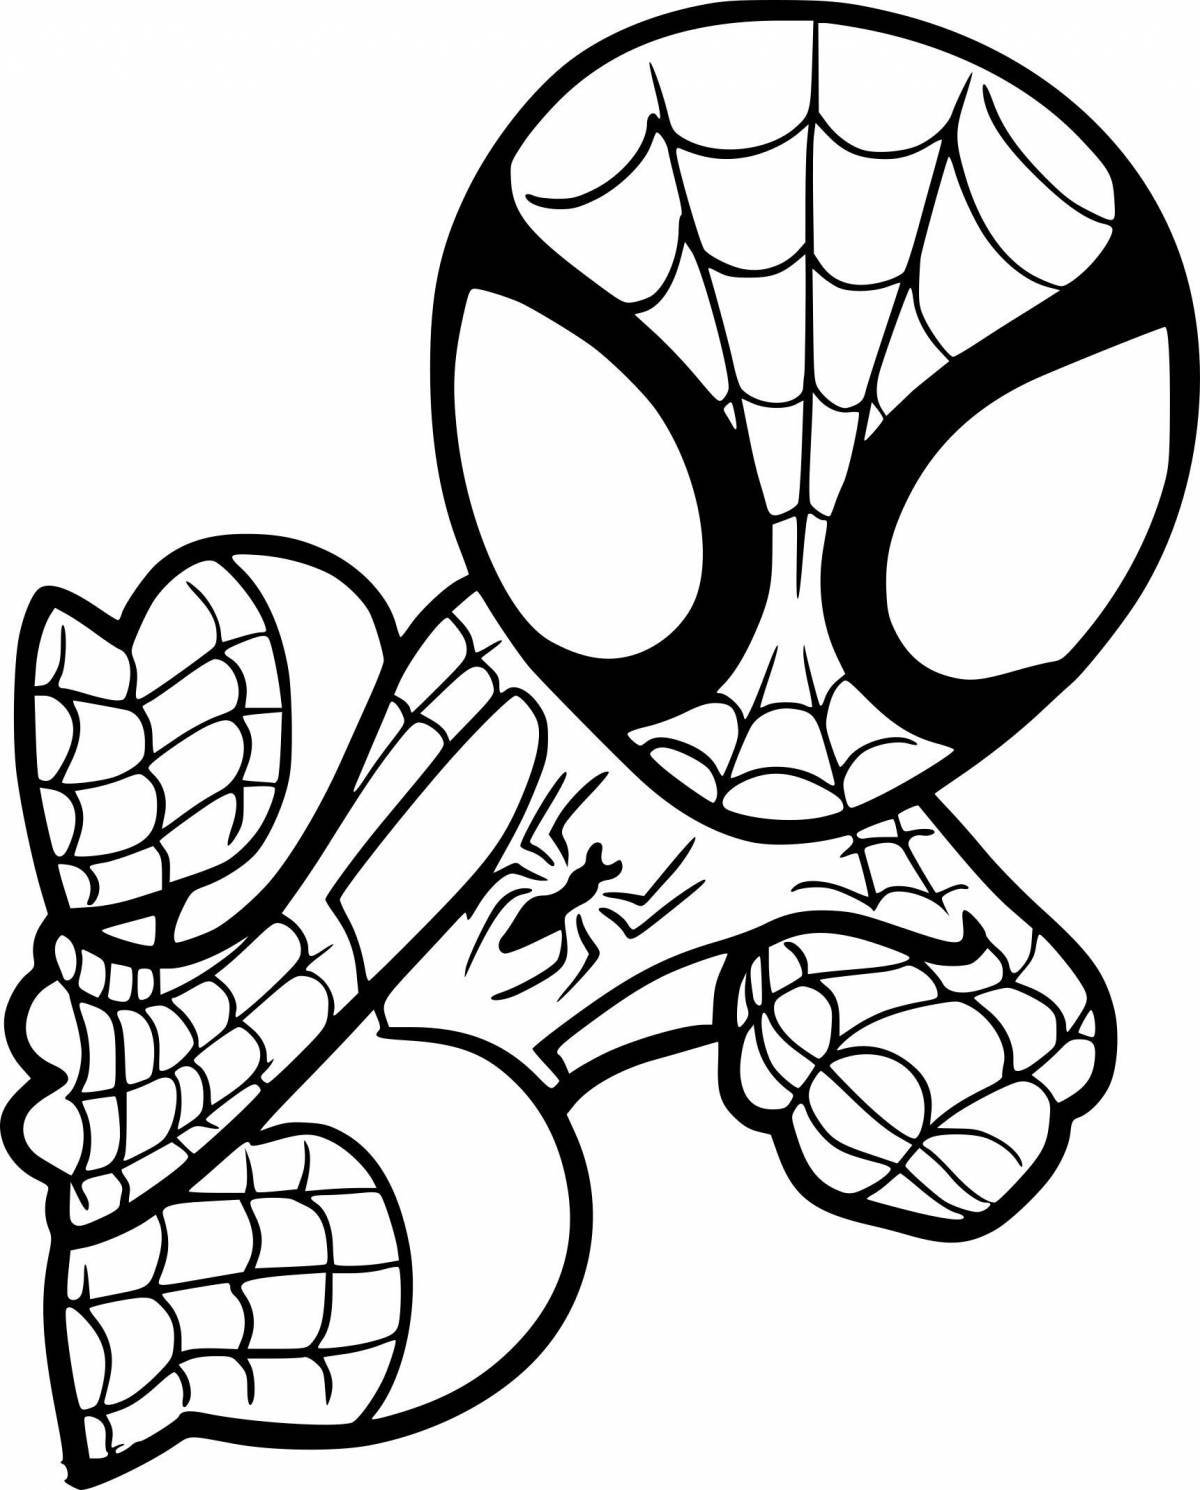 Spider-man's colorful coloring book